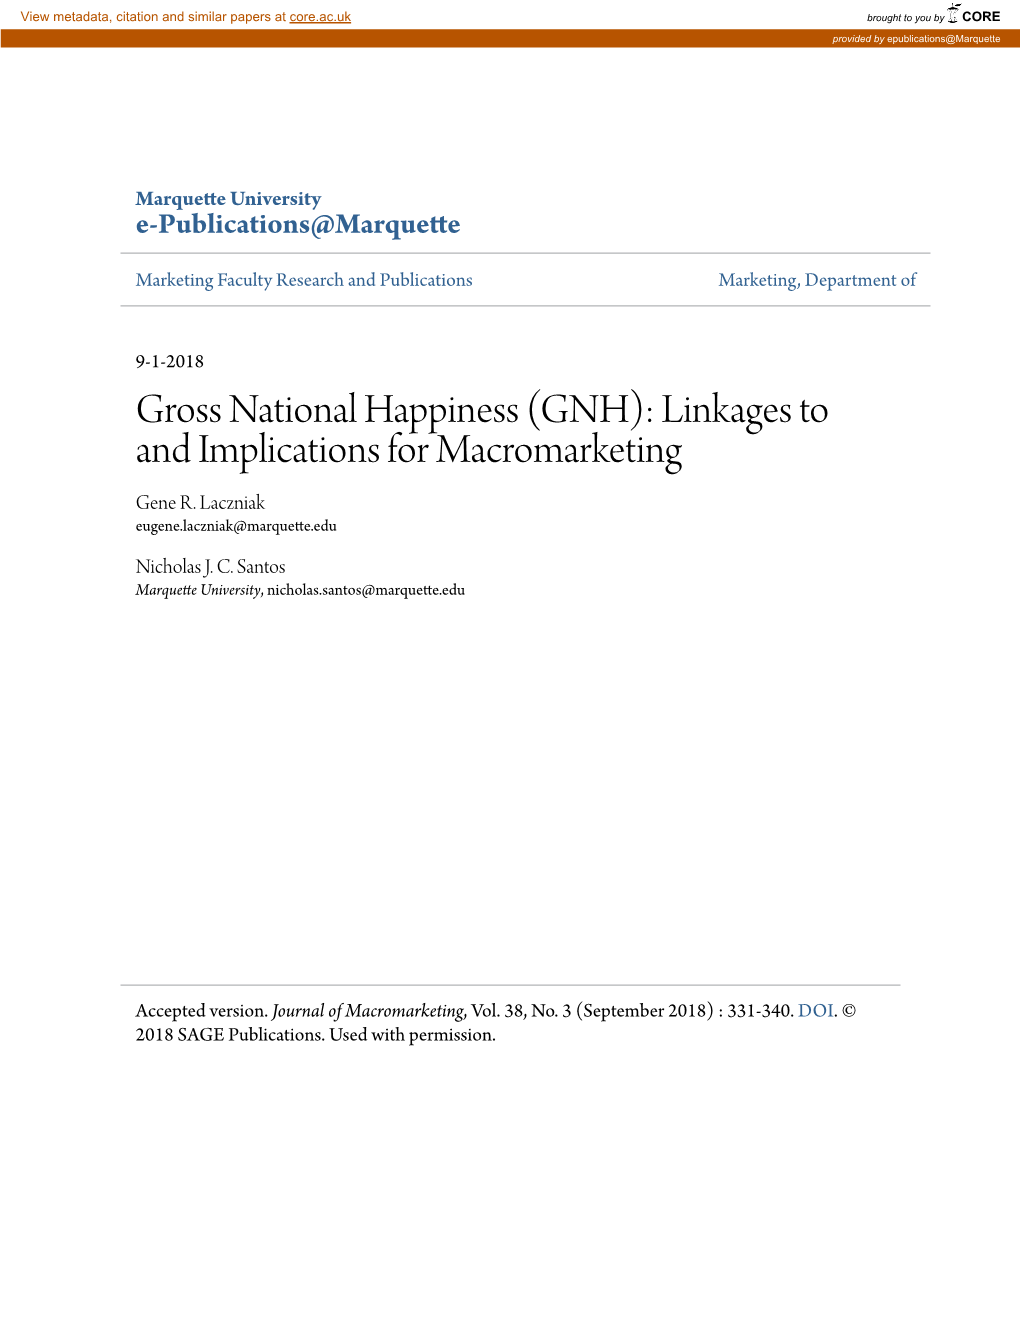 Gross National Happiness (GNH): Linkages to and Implications for Macromarketing Gene R